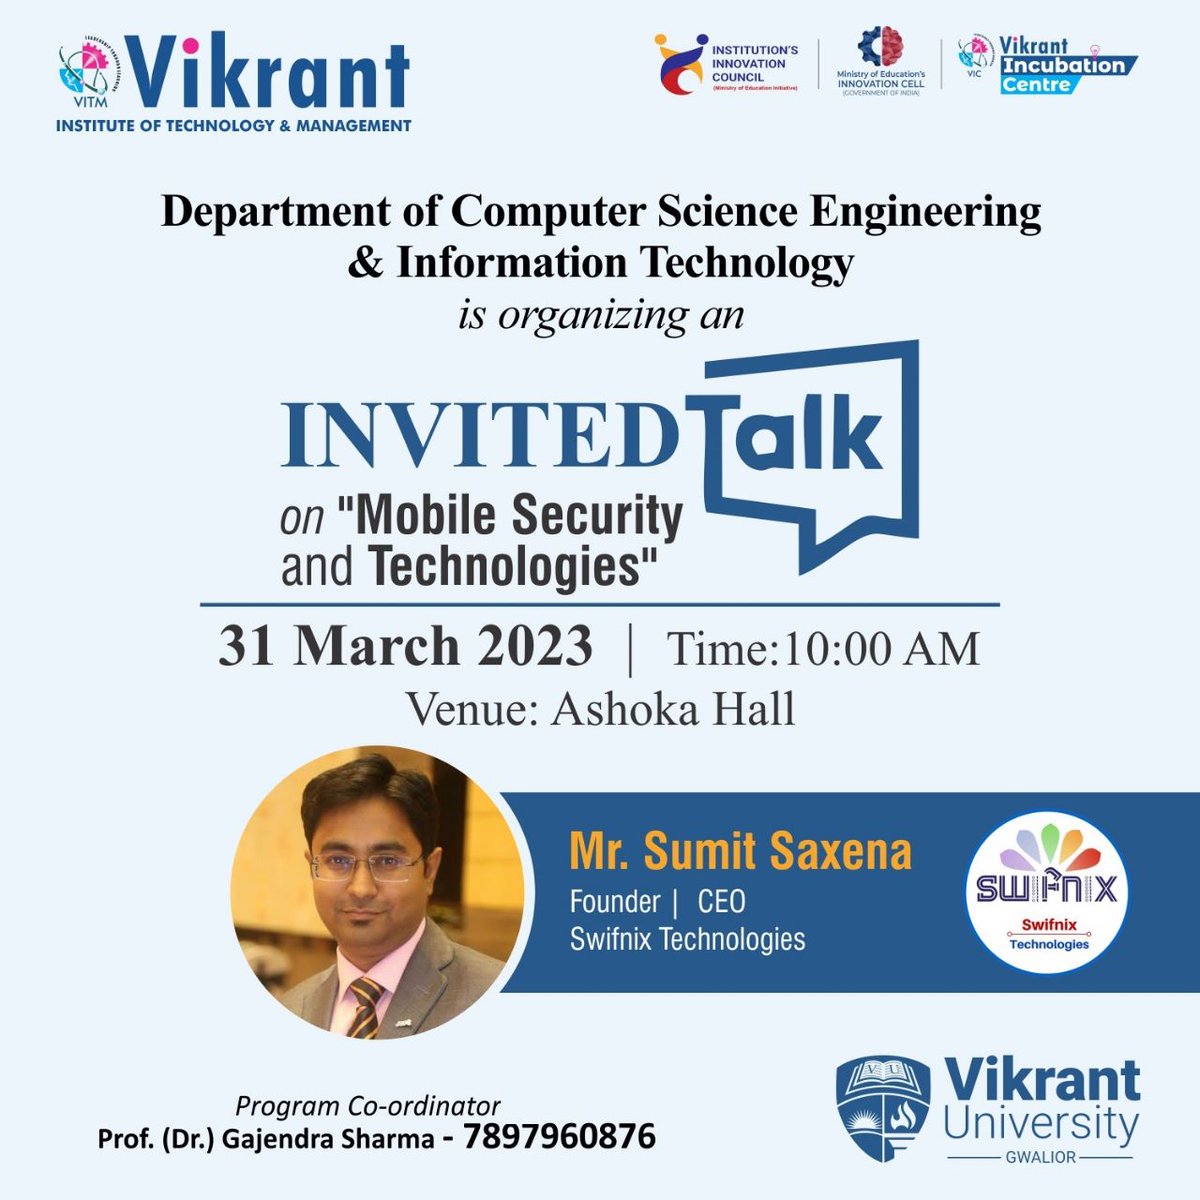 Department of CS/IT,VITM Gwalior in association with Institutions Innovation Council is organizing an Invited Talk on Mobile security and technologies.

#InvitedTalk #MobileSecurity #MobileTechnologies #VikrantUniversity #VikrantGroupofInstitutions #Gwalior #MadhyaPradesh #India